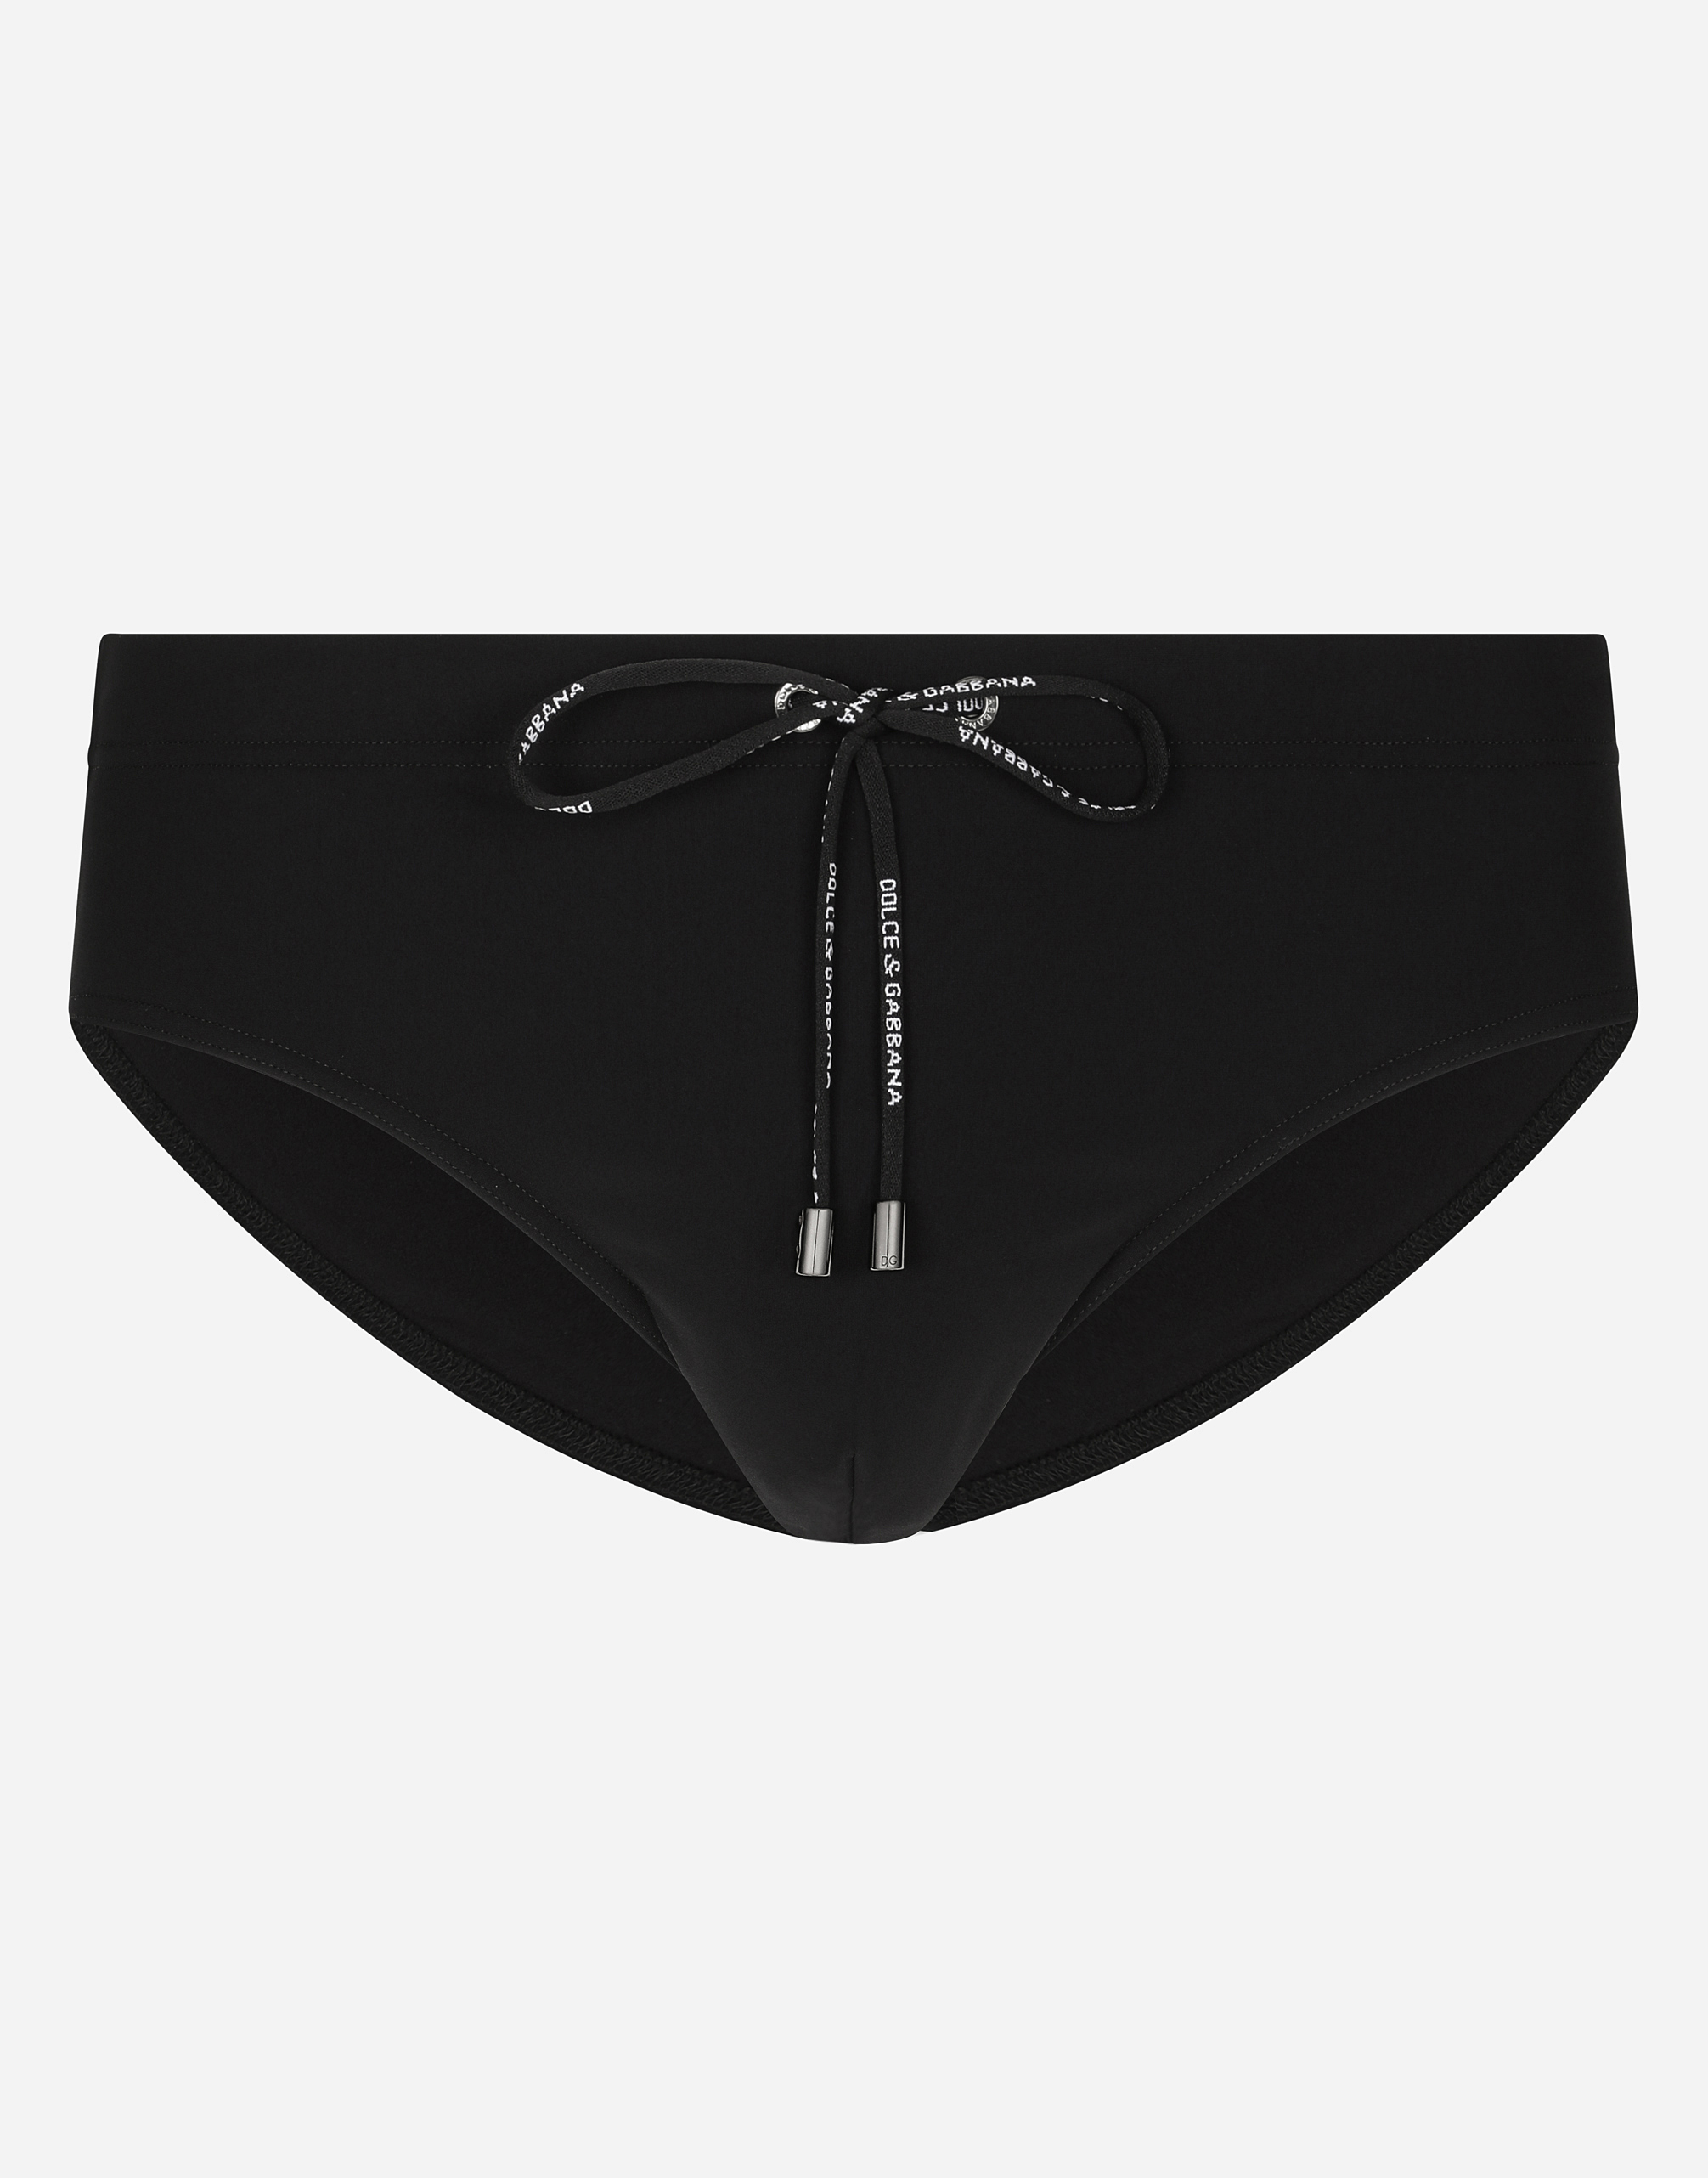 Swim briefs with high-cut leg and branded rear waistband in Black